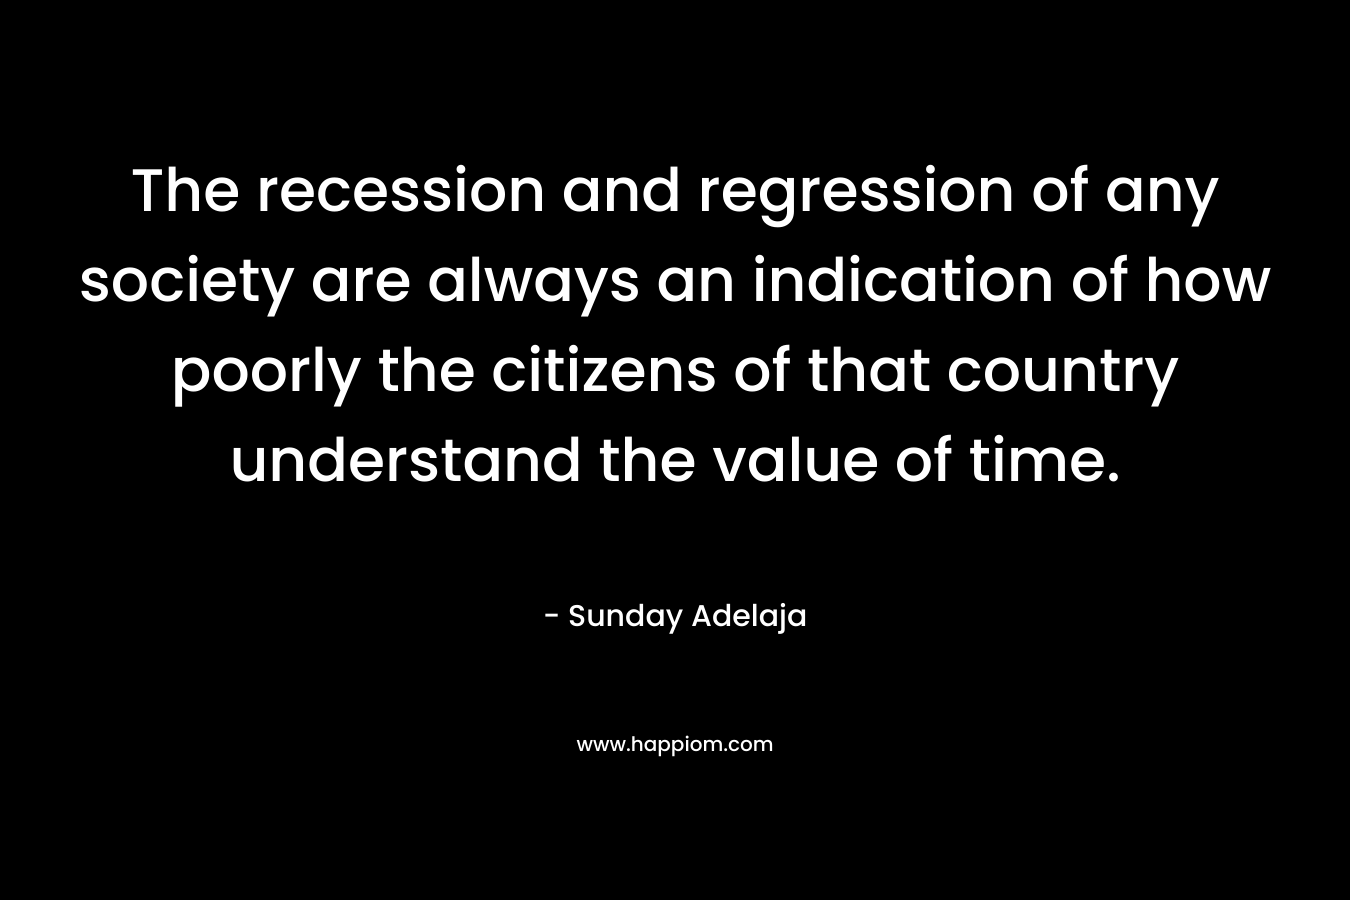 The recession and regression of any society are always an indication of how poorly the citizens of that country understand the value of time.